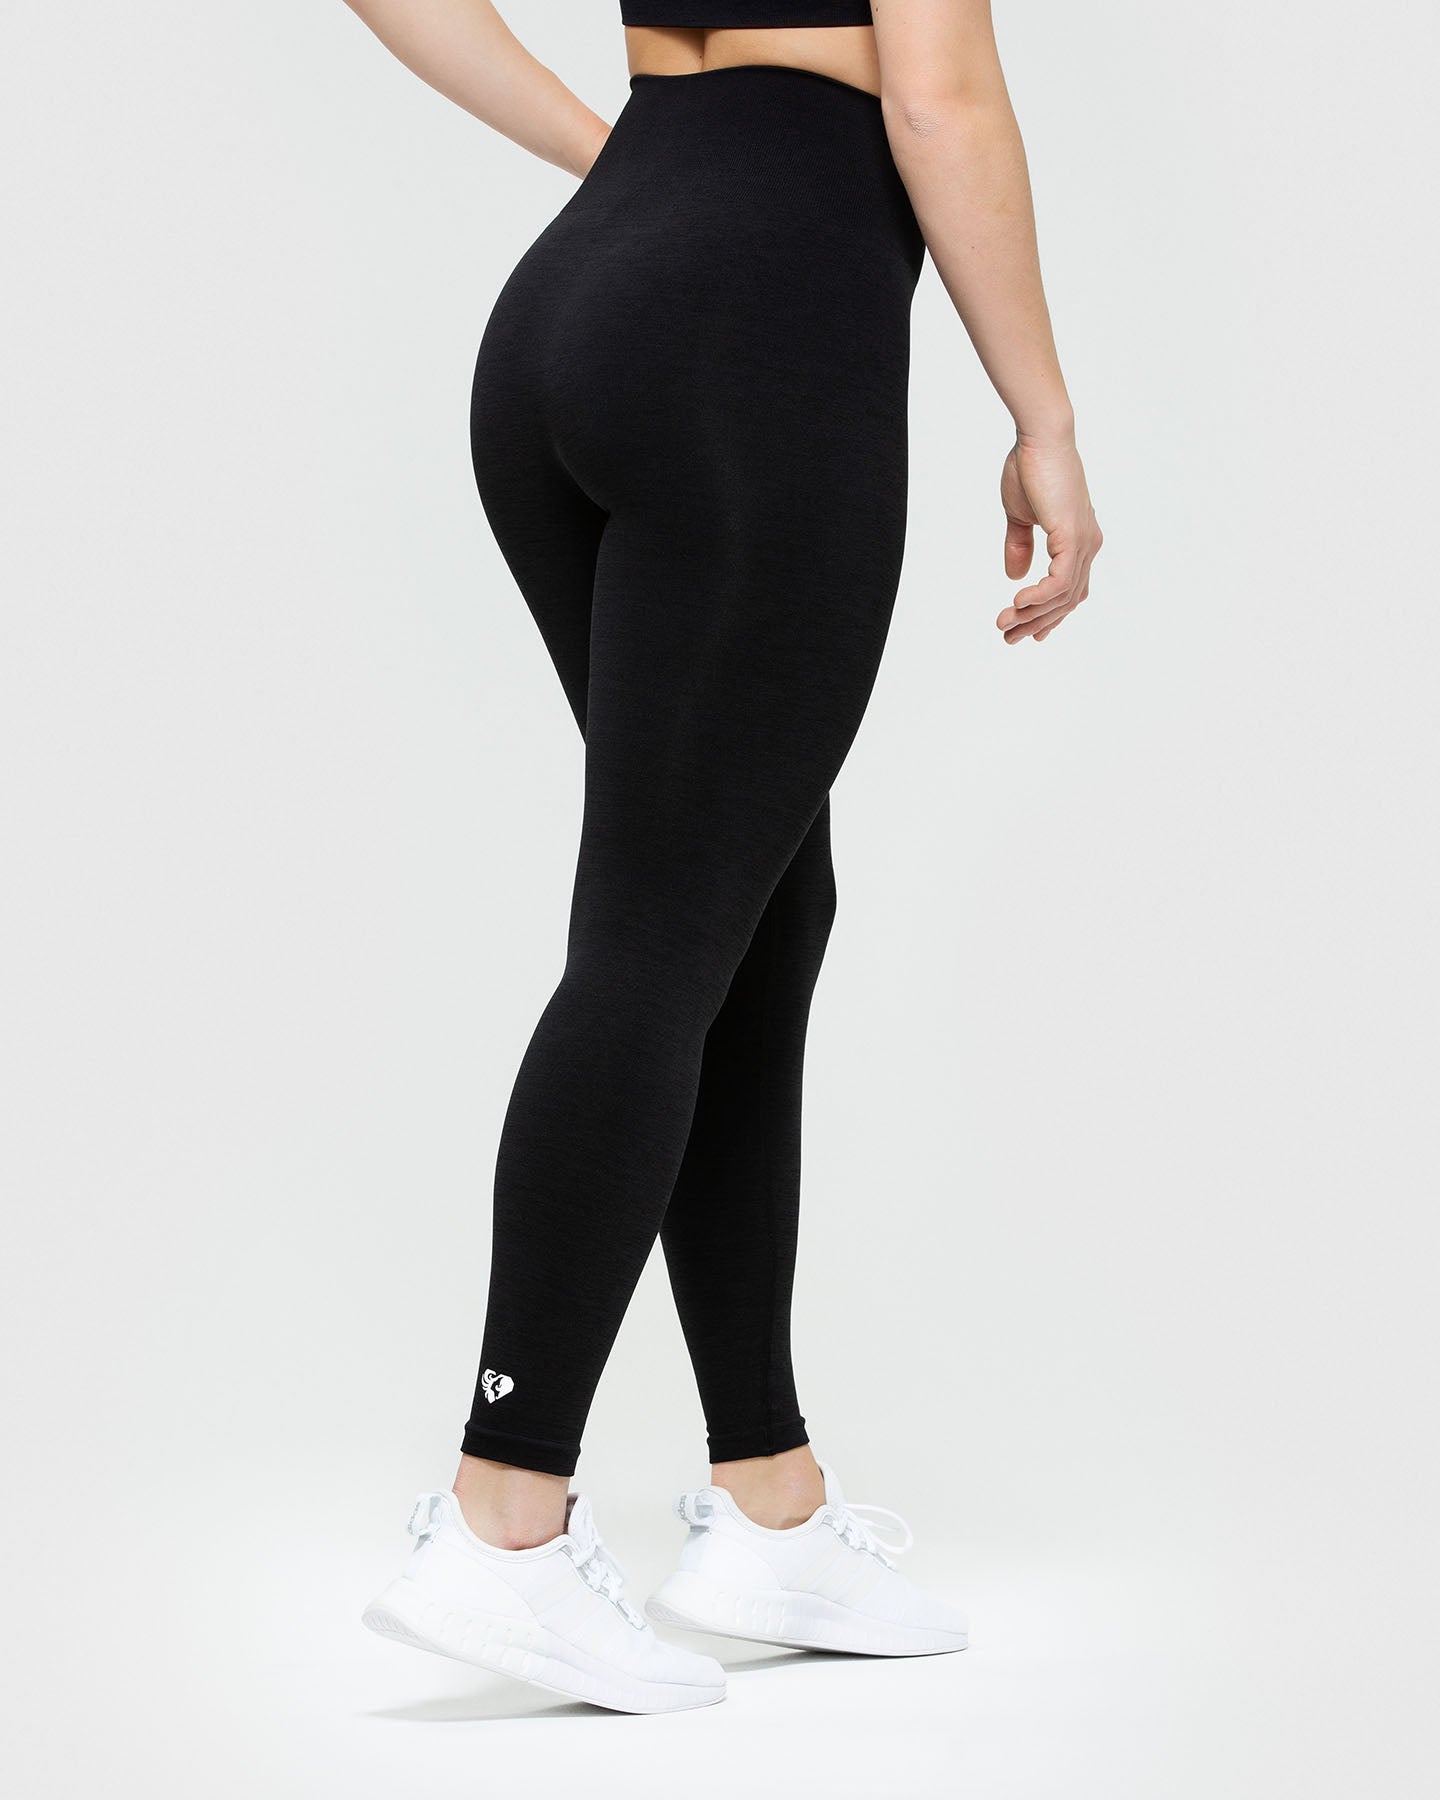 The Most Common high waisted leggings Debate Isn't as Black and White as  You Might Think by y4sqwpw844 - Issuu